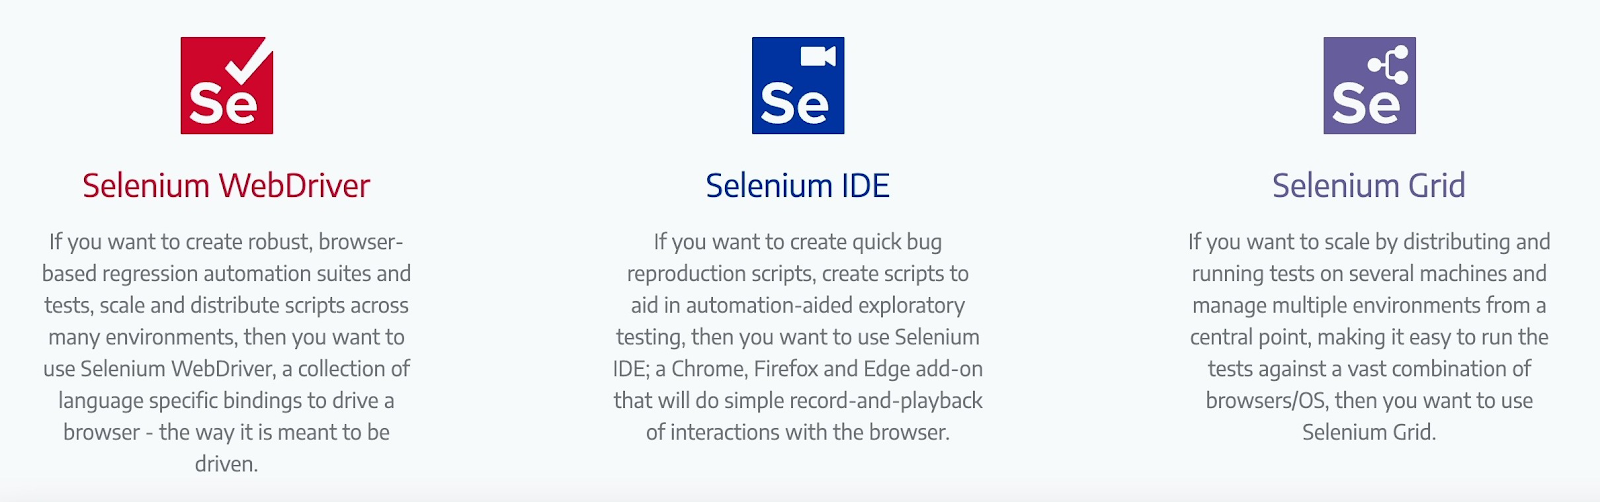 Selenium offers three products for web browser automation: WebDriver API, IDE and Grid. 